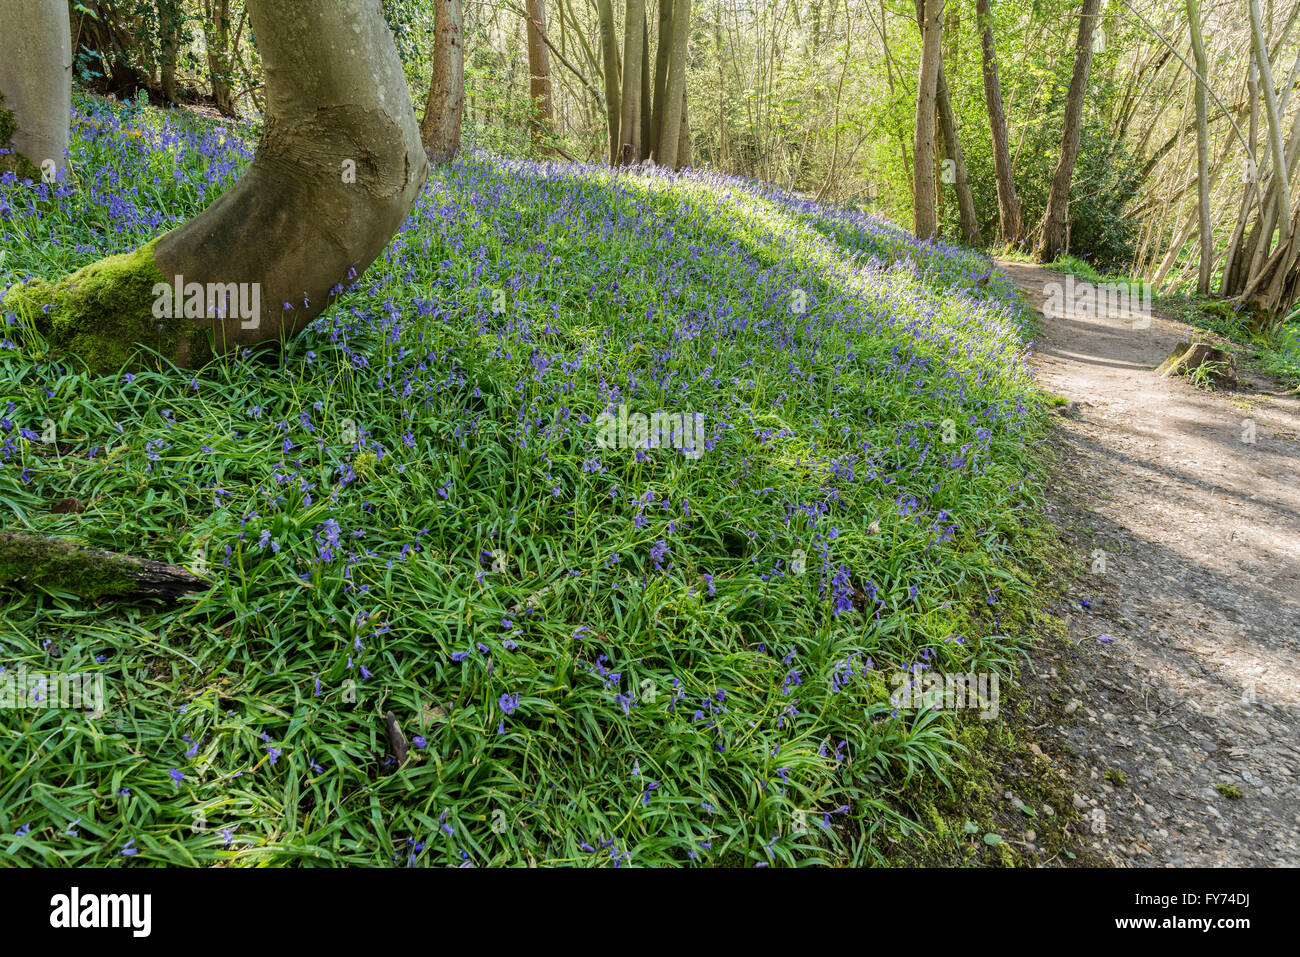 Pathway cutting through a vibrant bluebell wood Stock Photo